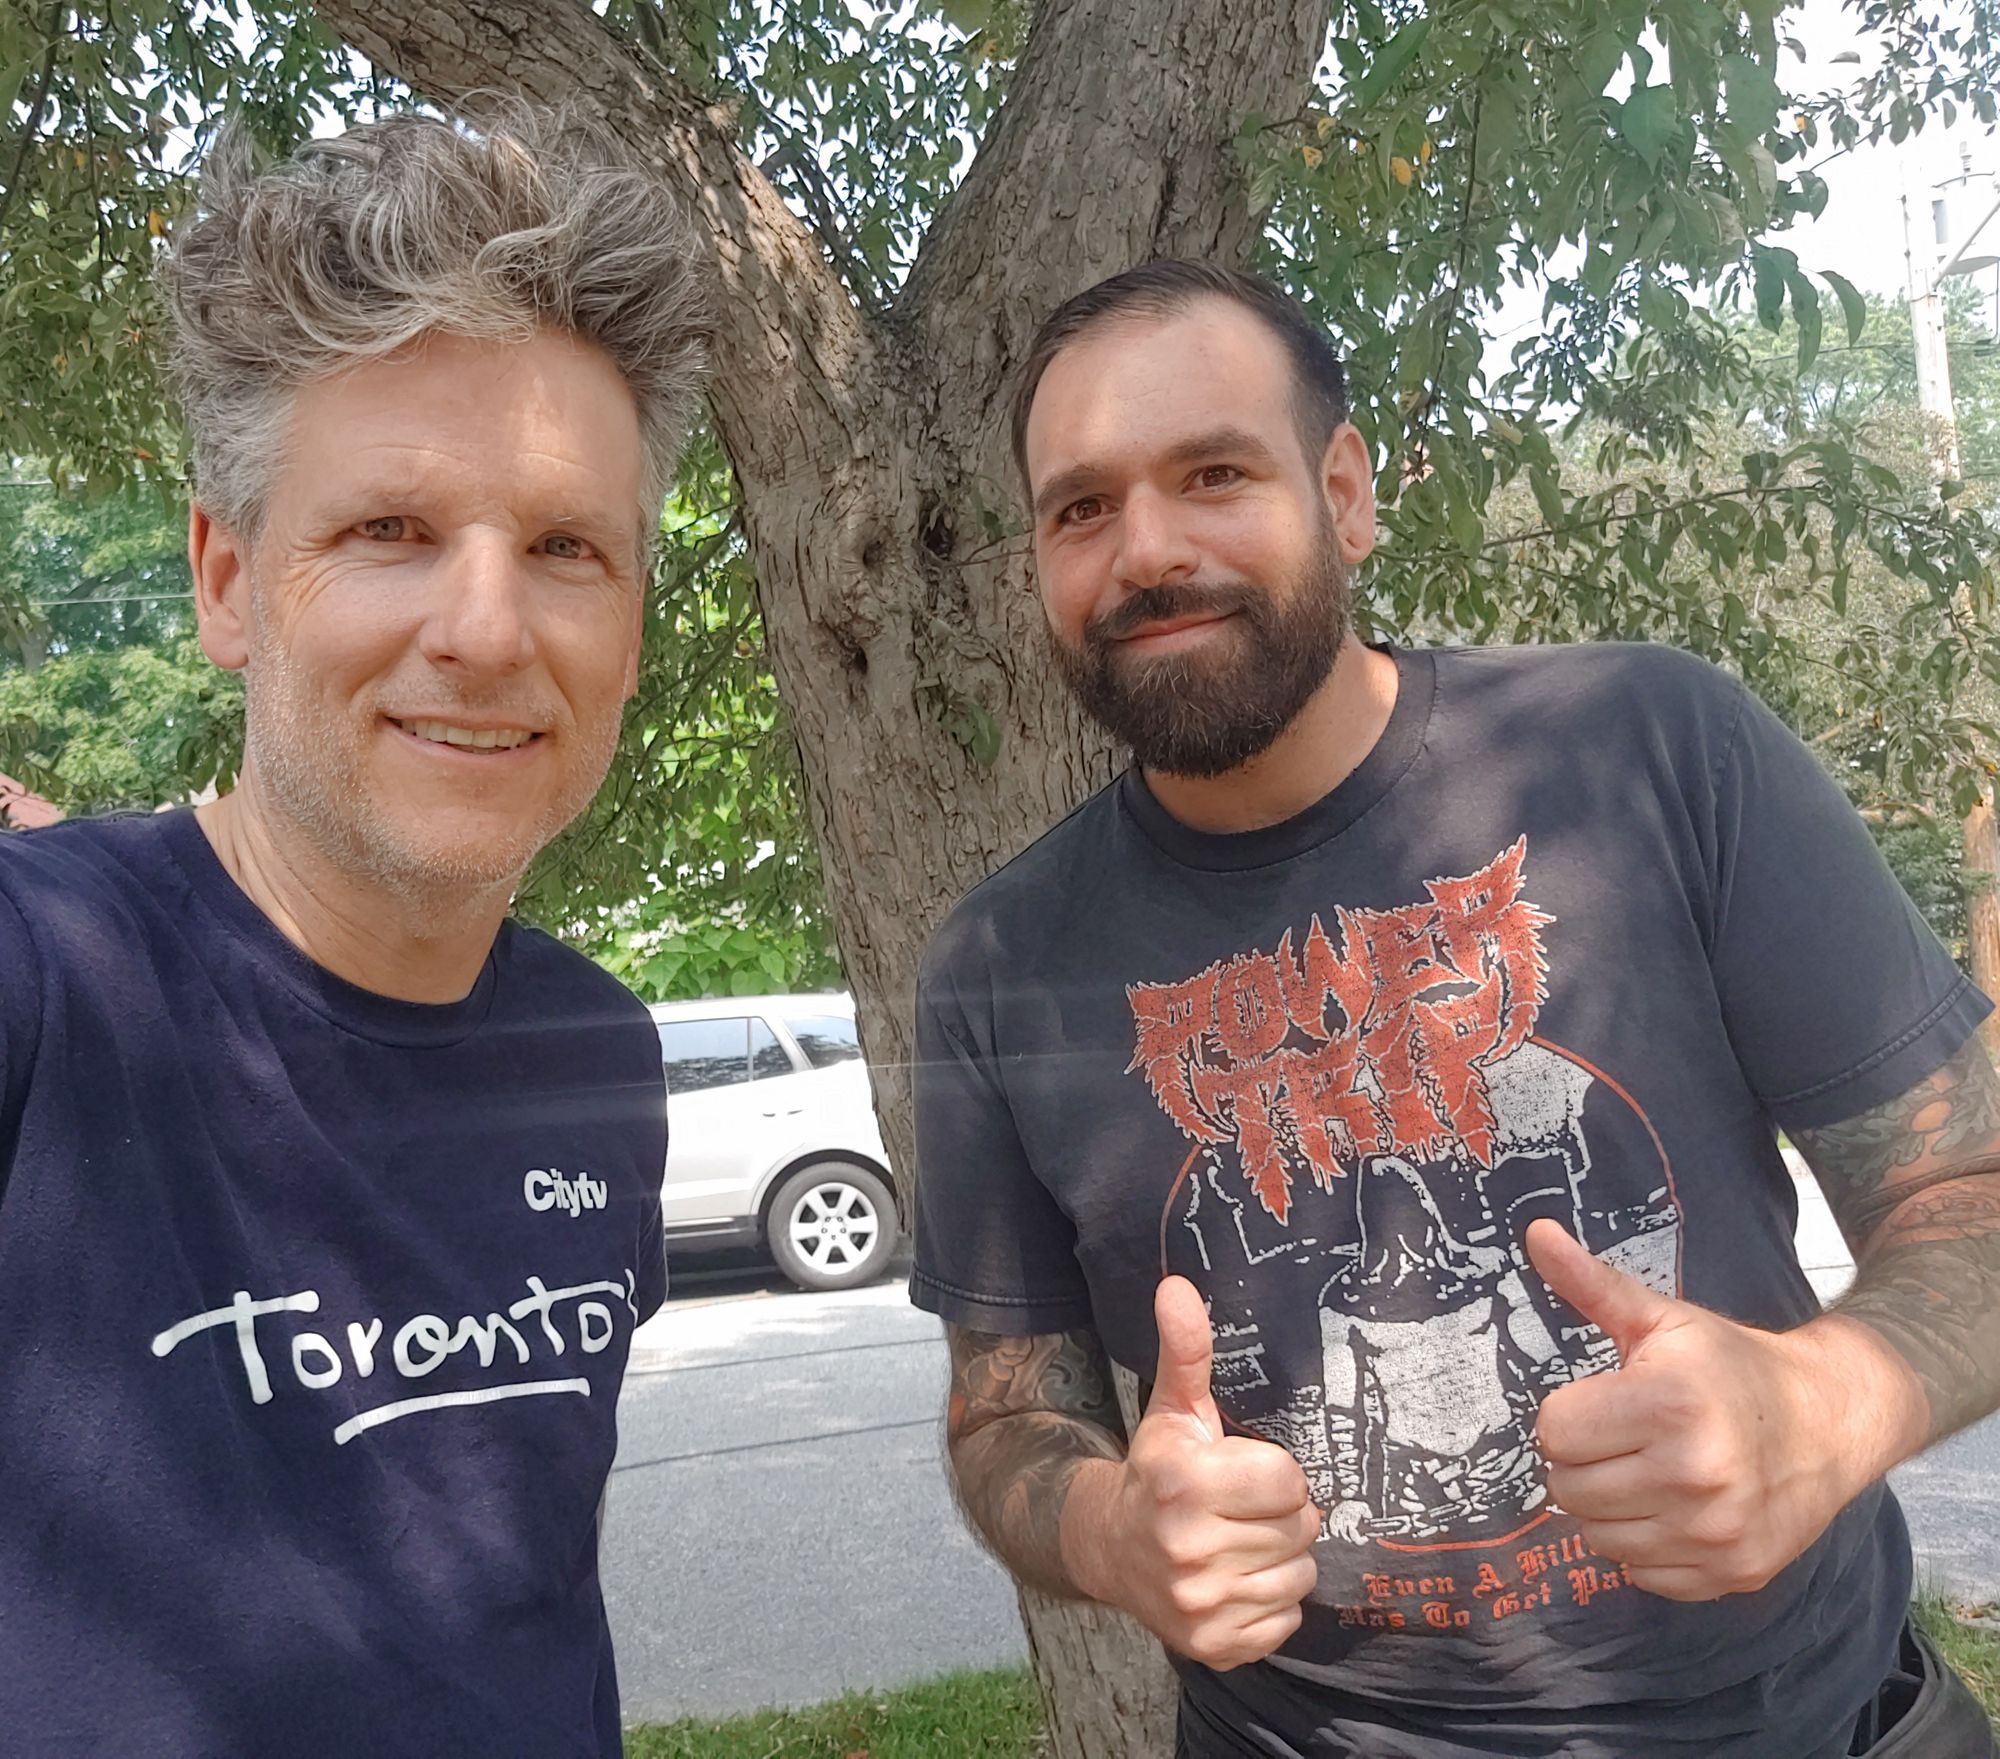 Andi: Toronto Mike'd Podcast Episode 1283